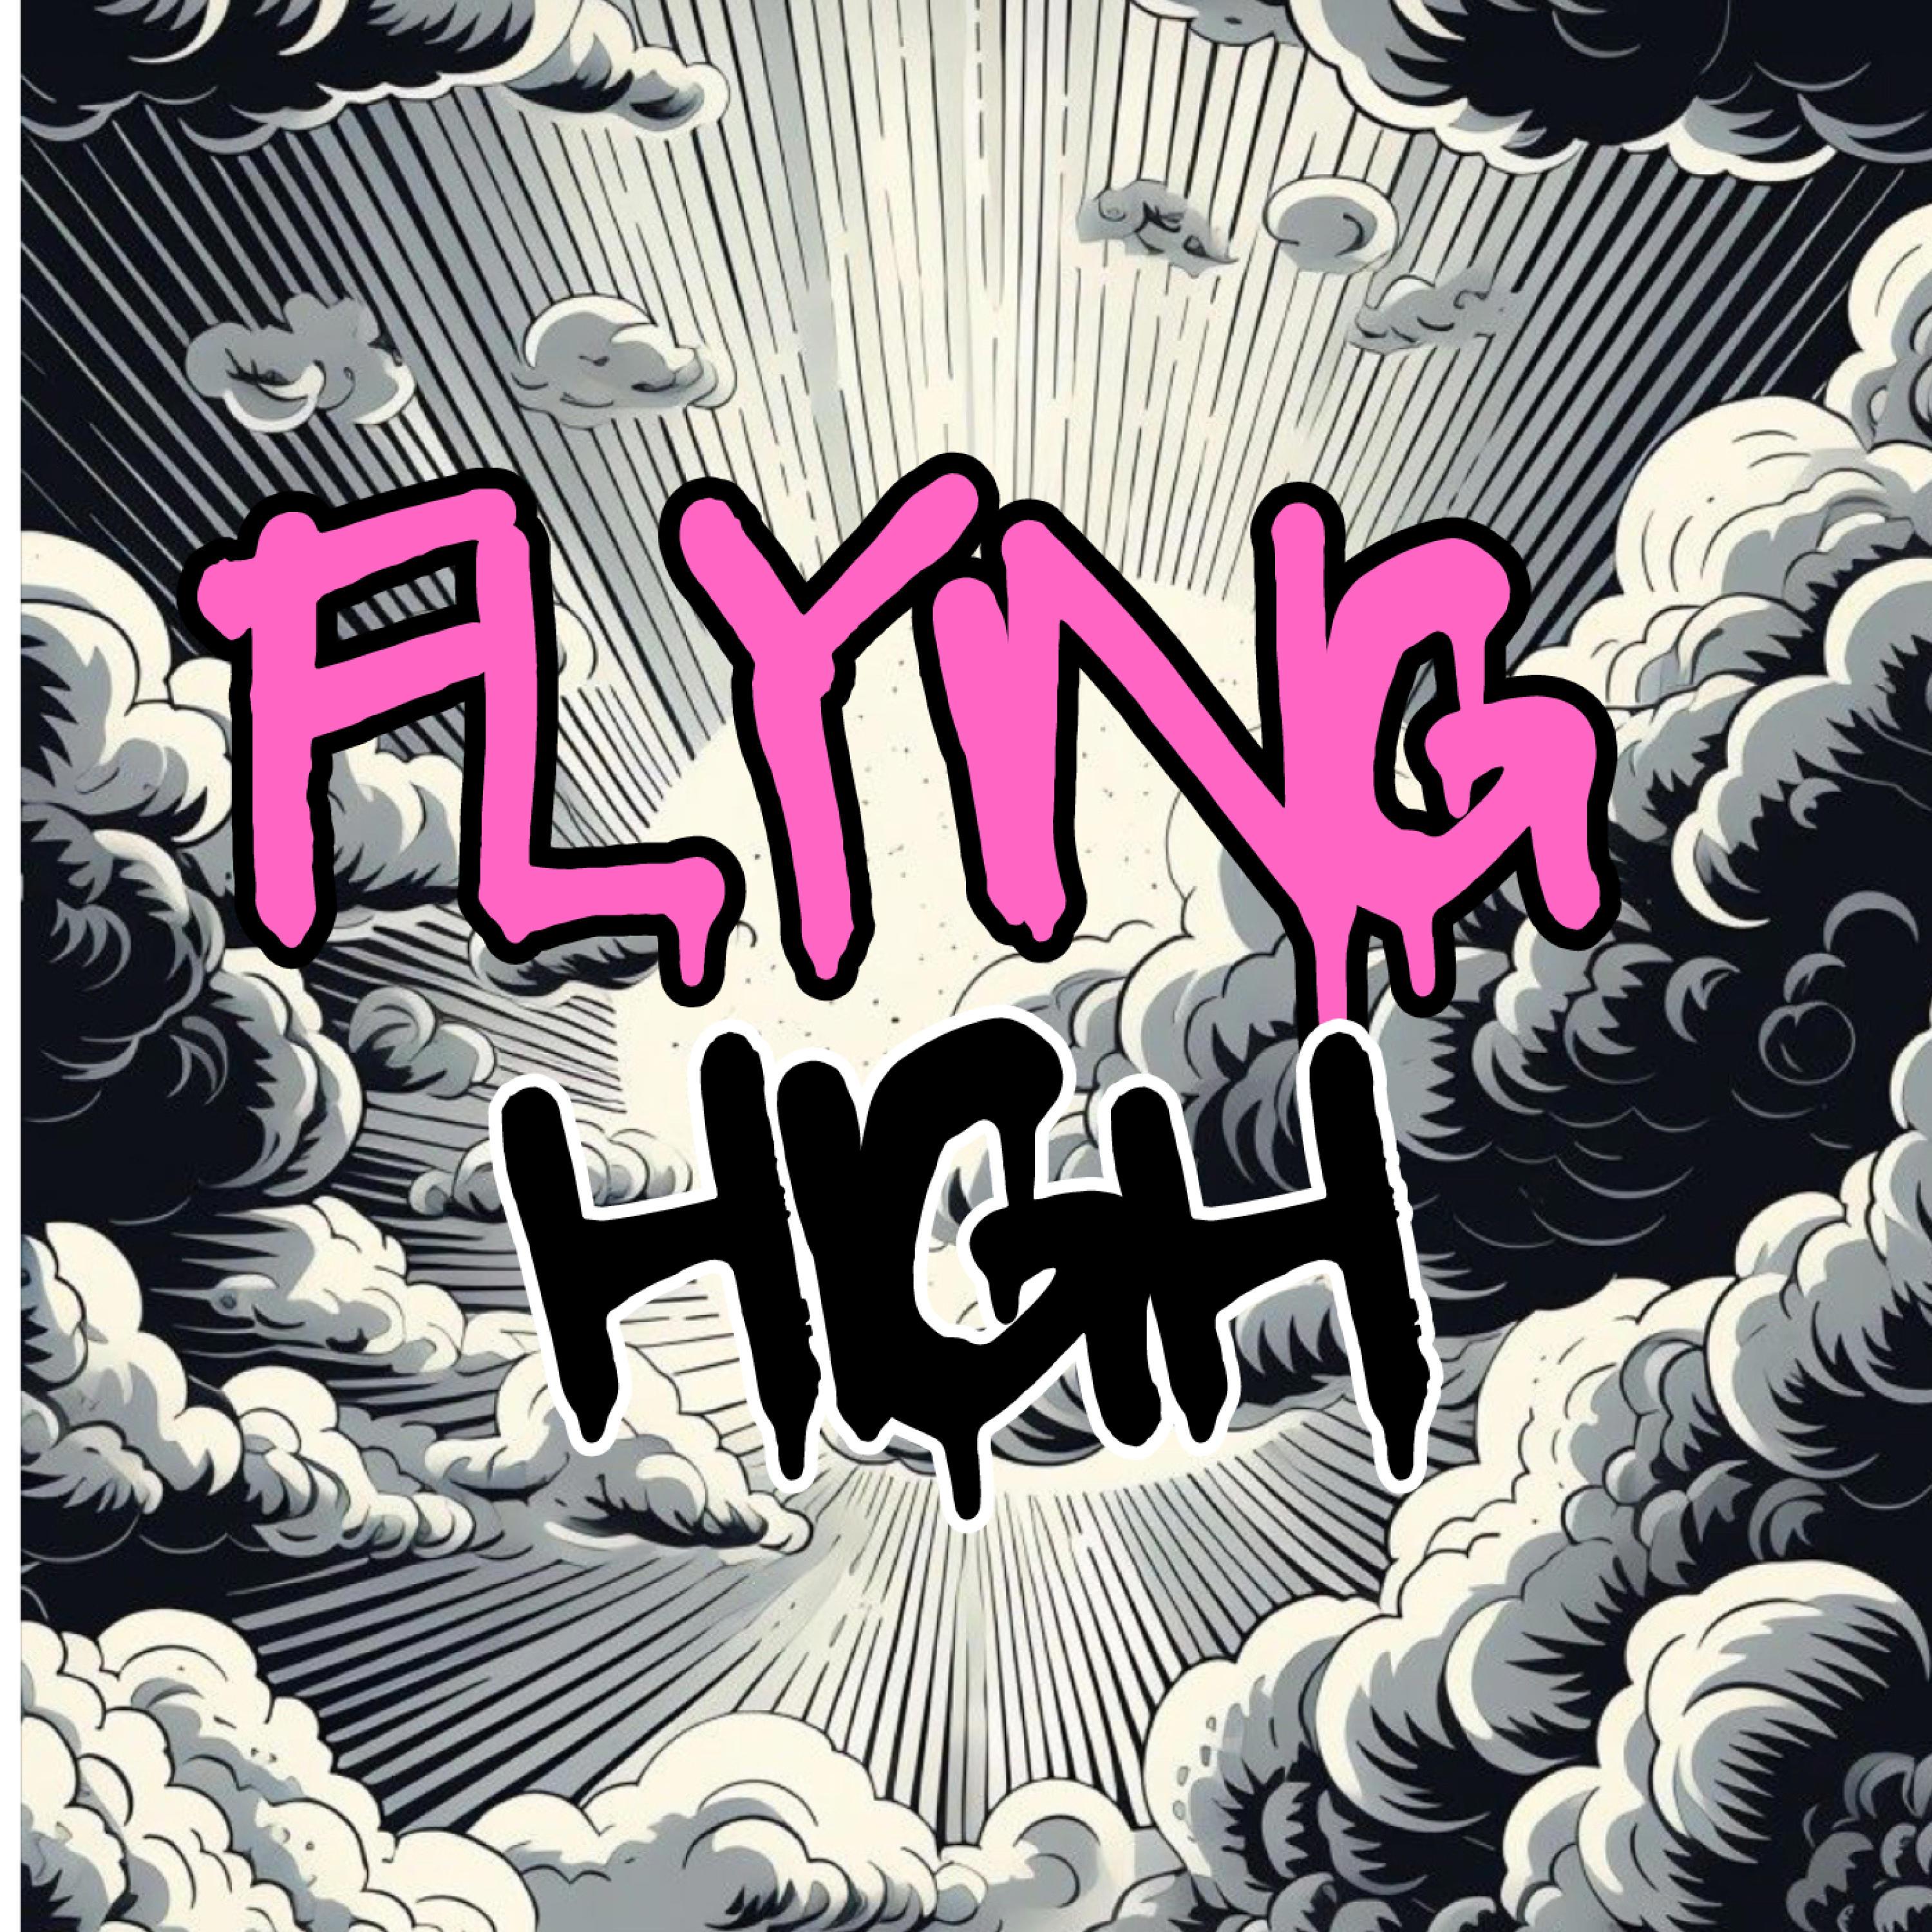 Flying High - Obscuridad